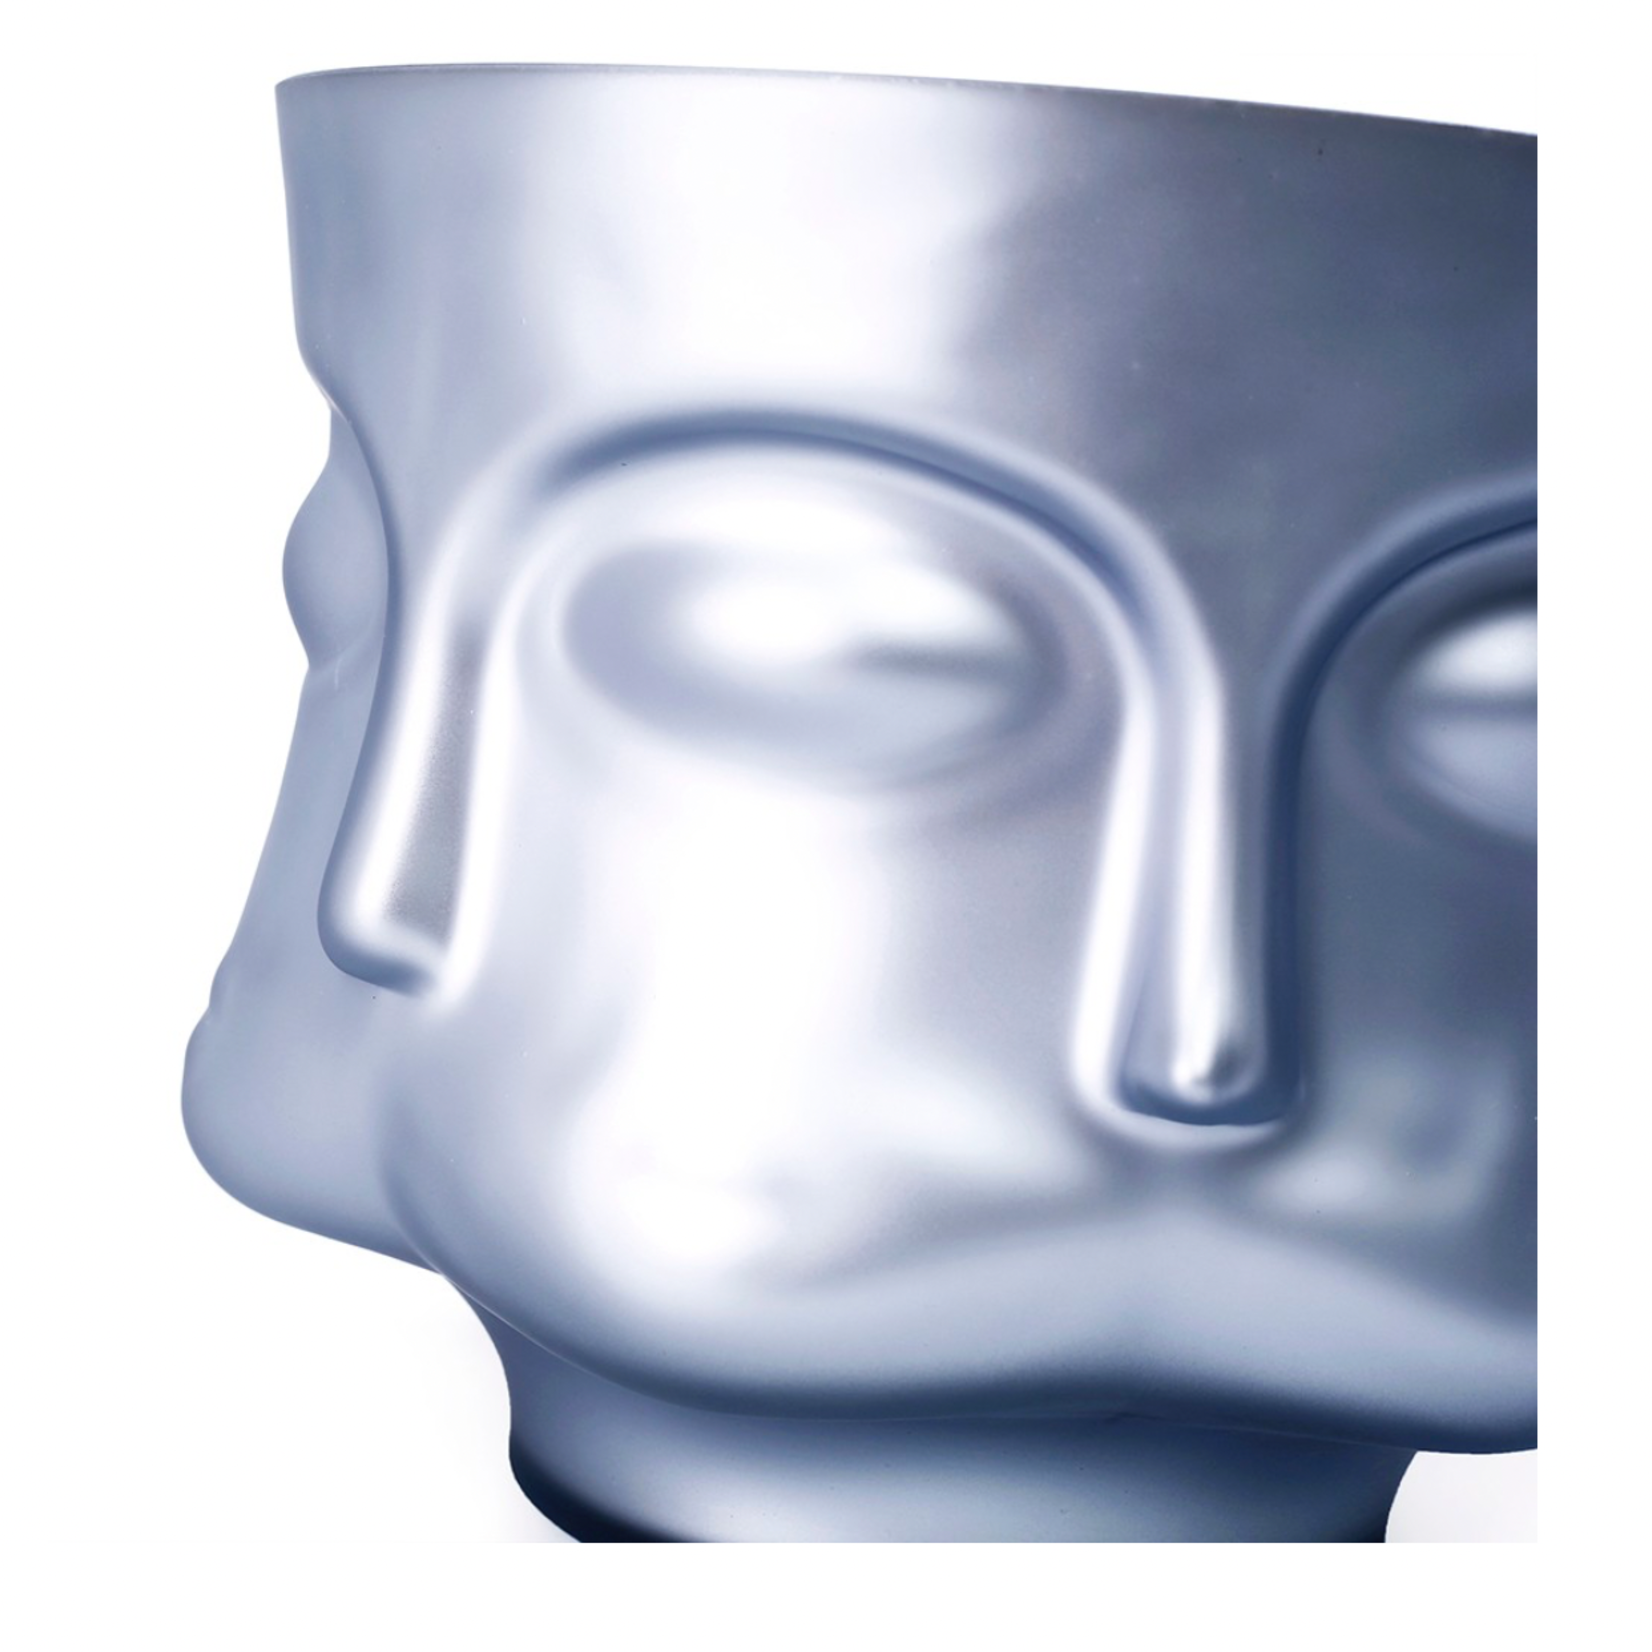 60% off was $35 now $14.00. 6.75”H X 8” SILVER GLASS FACE